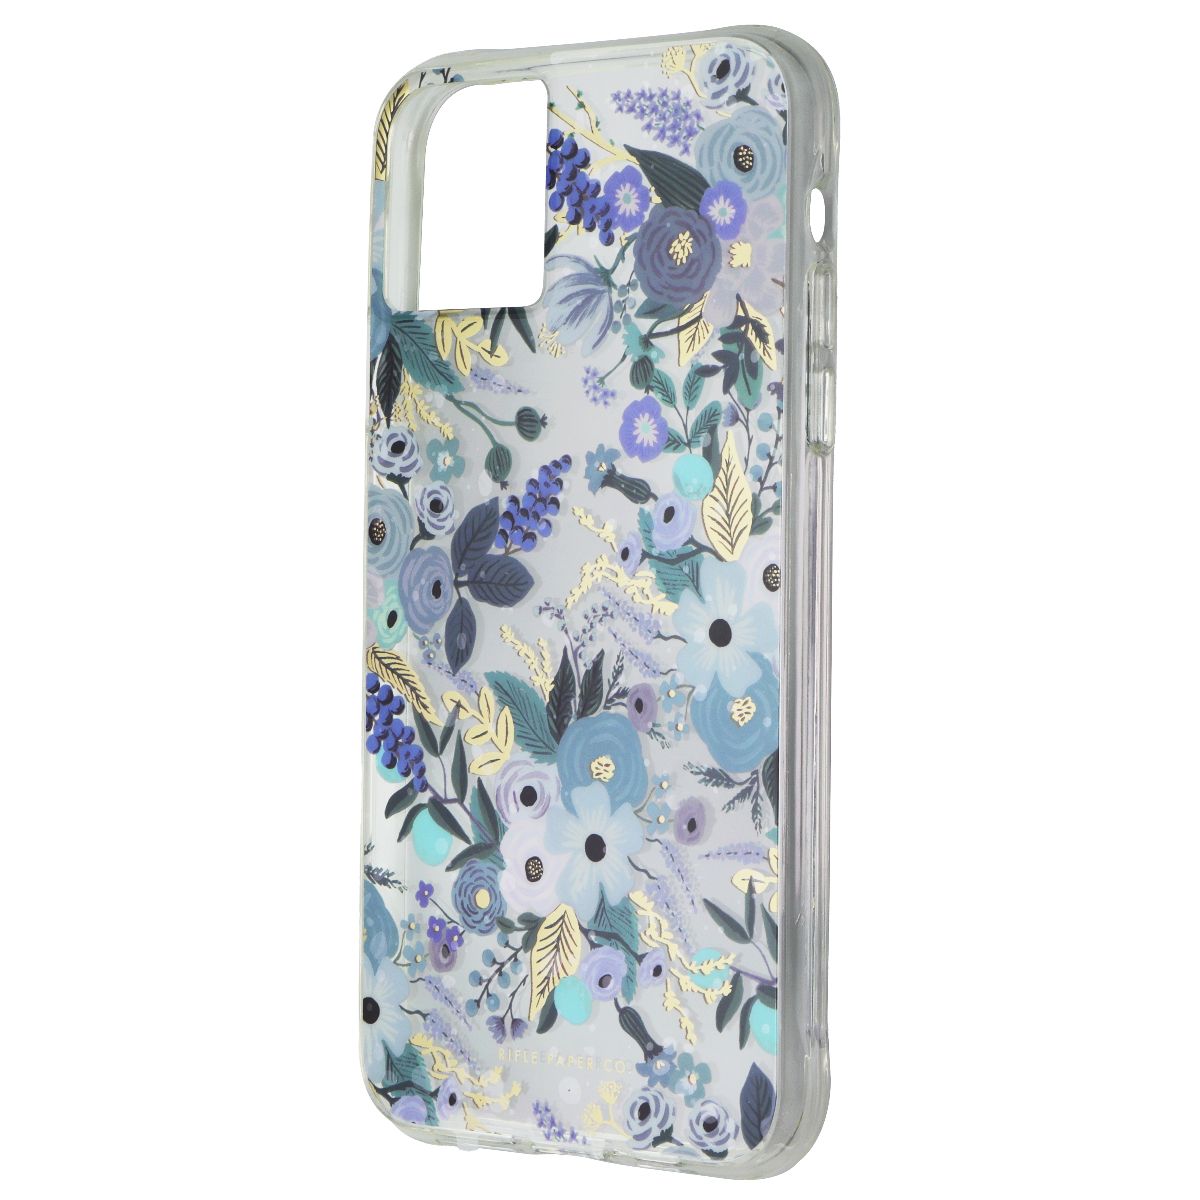 Rifle Paper Co. Case for Apple iPhone 11 Pro Max - Garden Party Blue